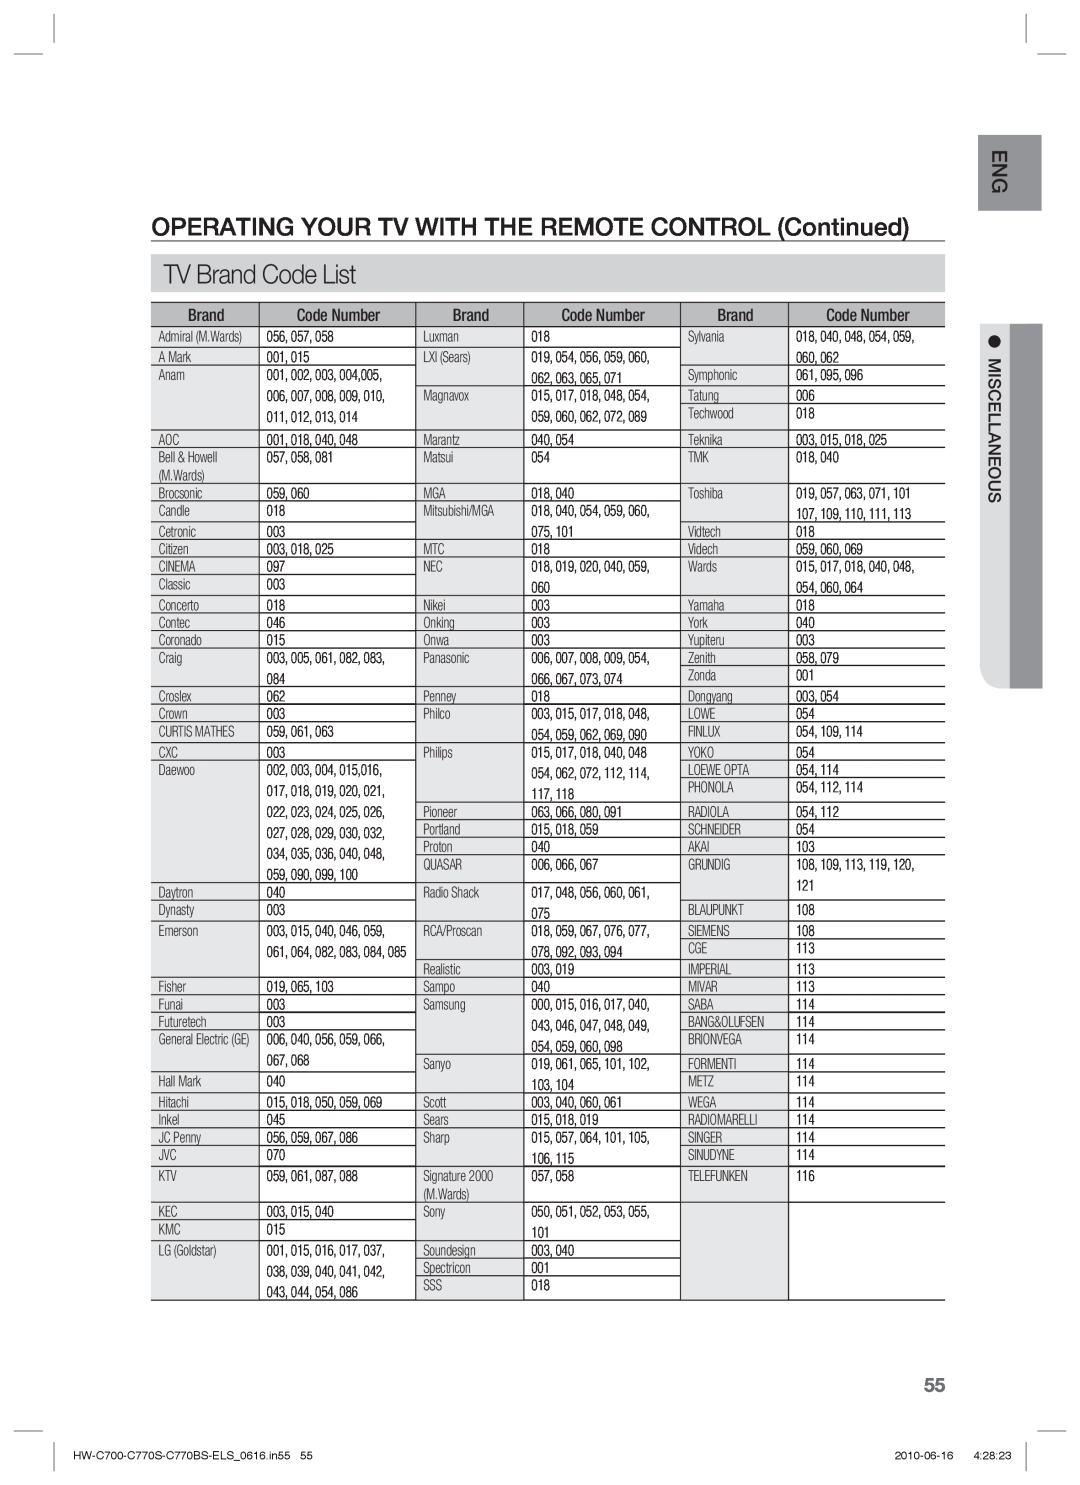 Samsung HW-C700B/XEN, HW-C770S/XEN, HW-C700/XEN TV Brand Code List, OPERATING YOUR TV WITH THE REMOTE CONTROL Continued 